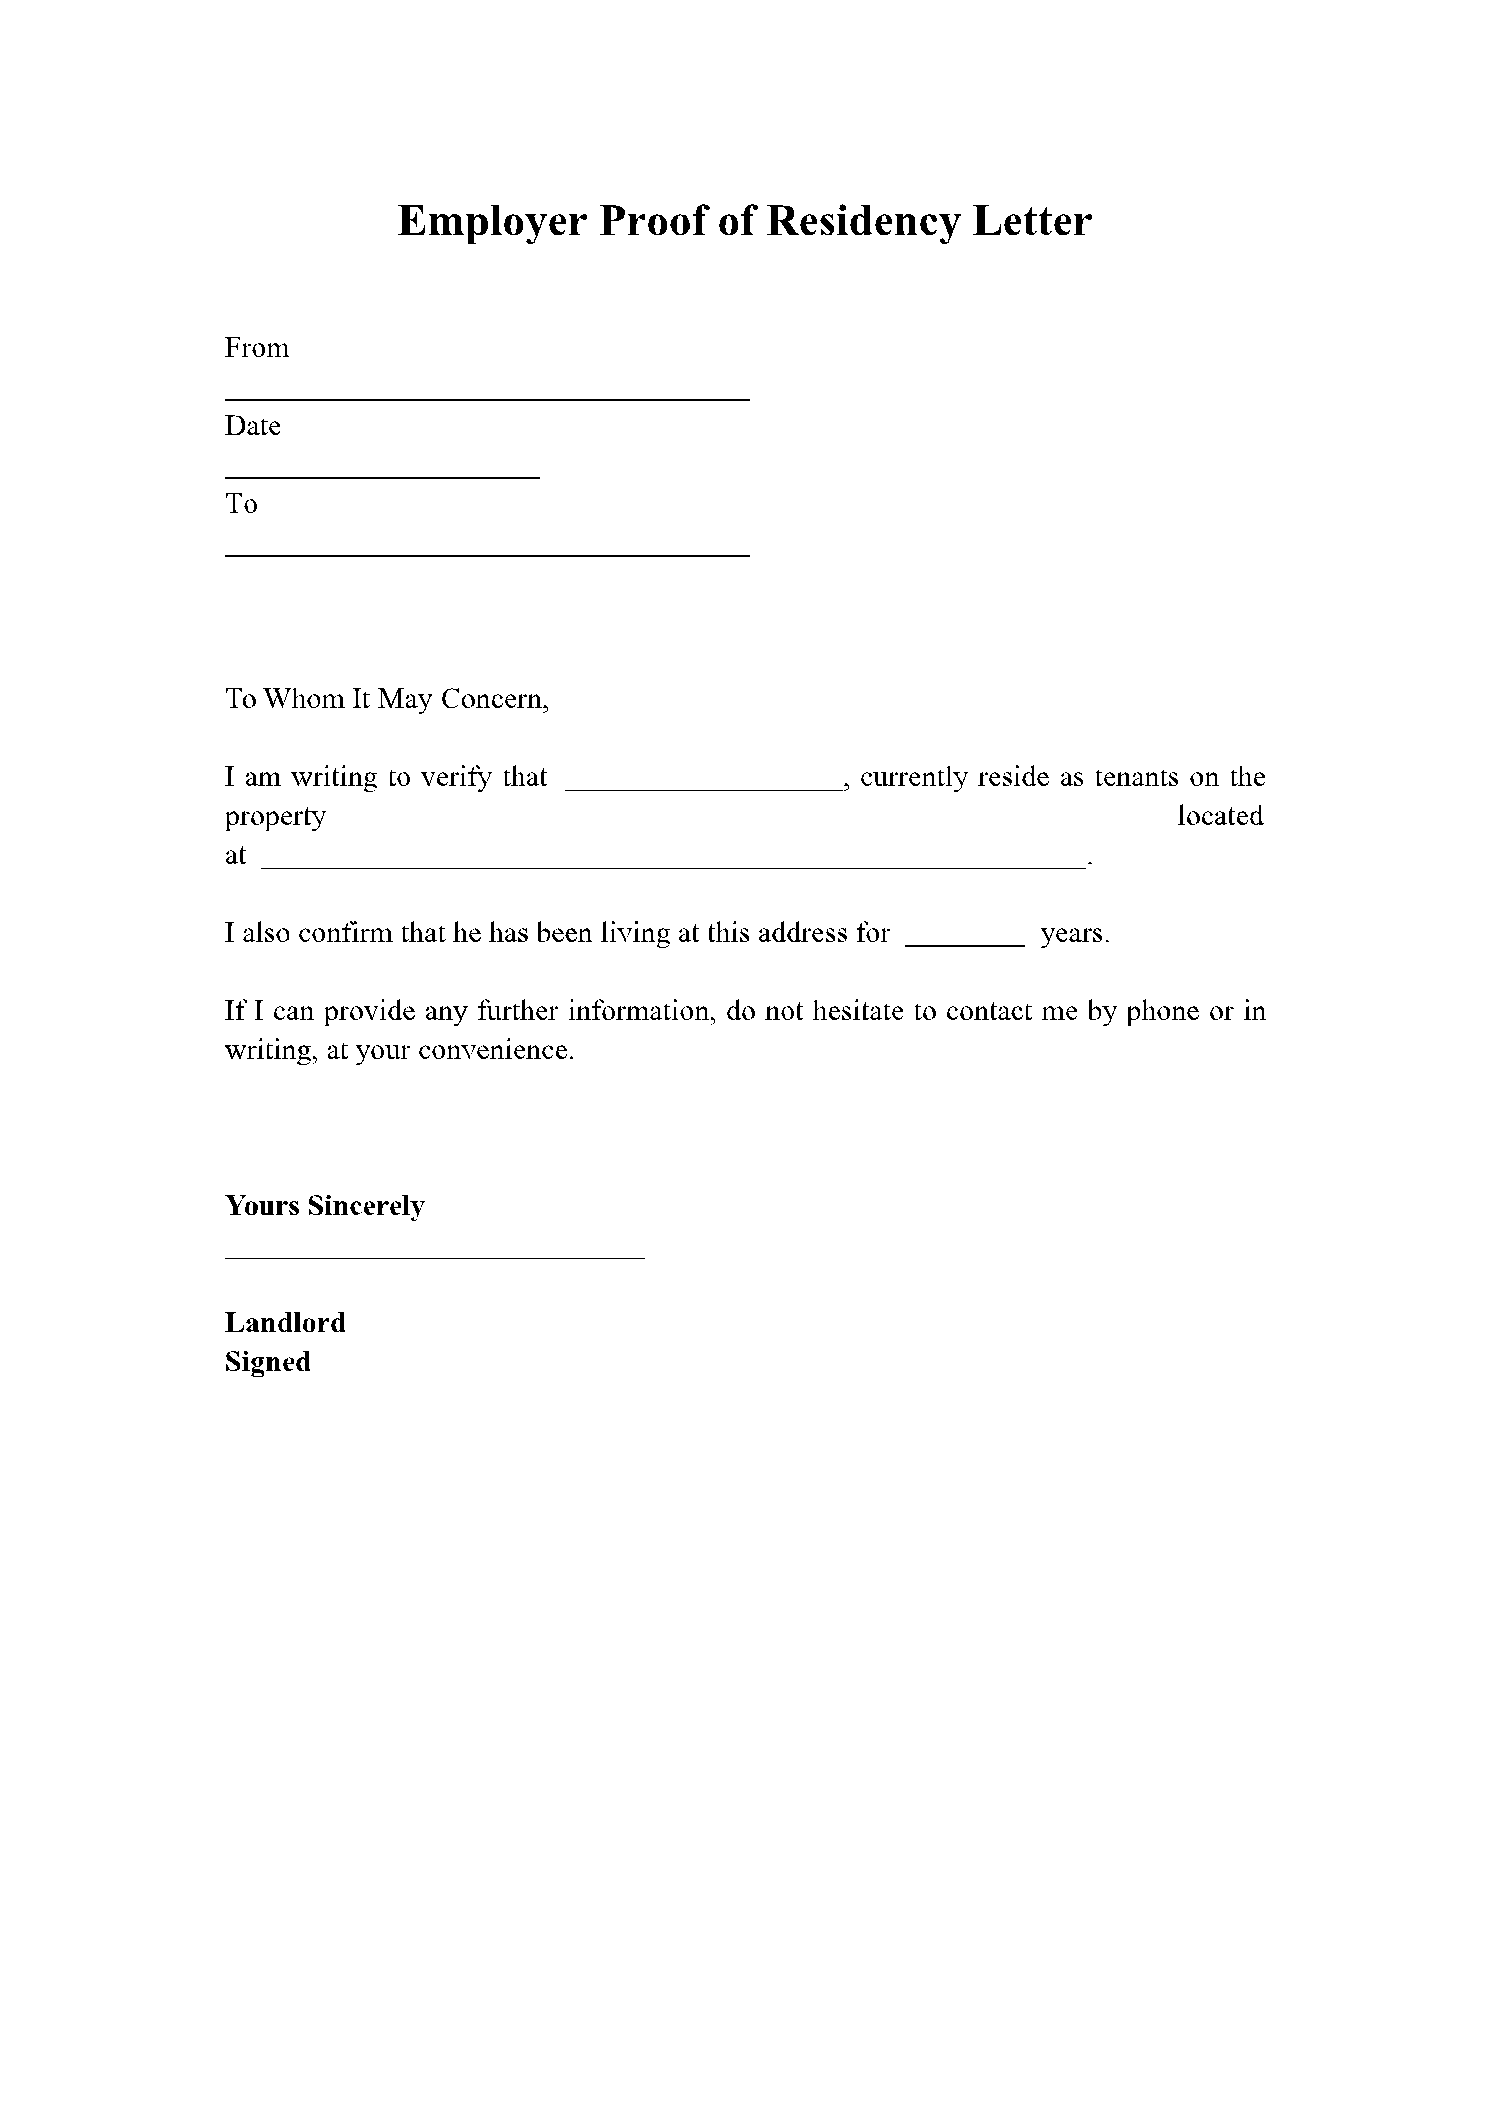 Proof of Residency Letter from Employer 1